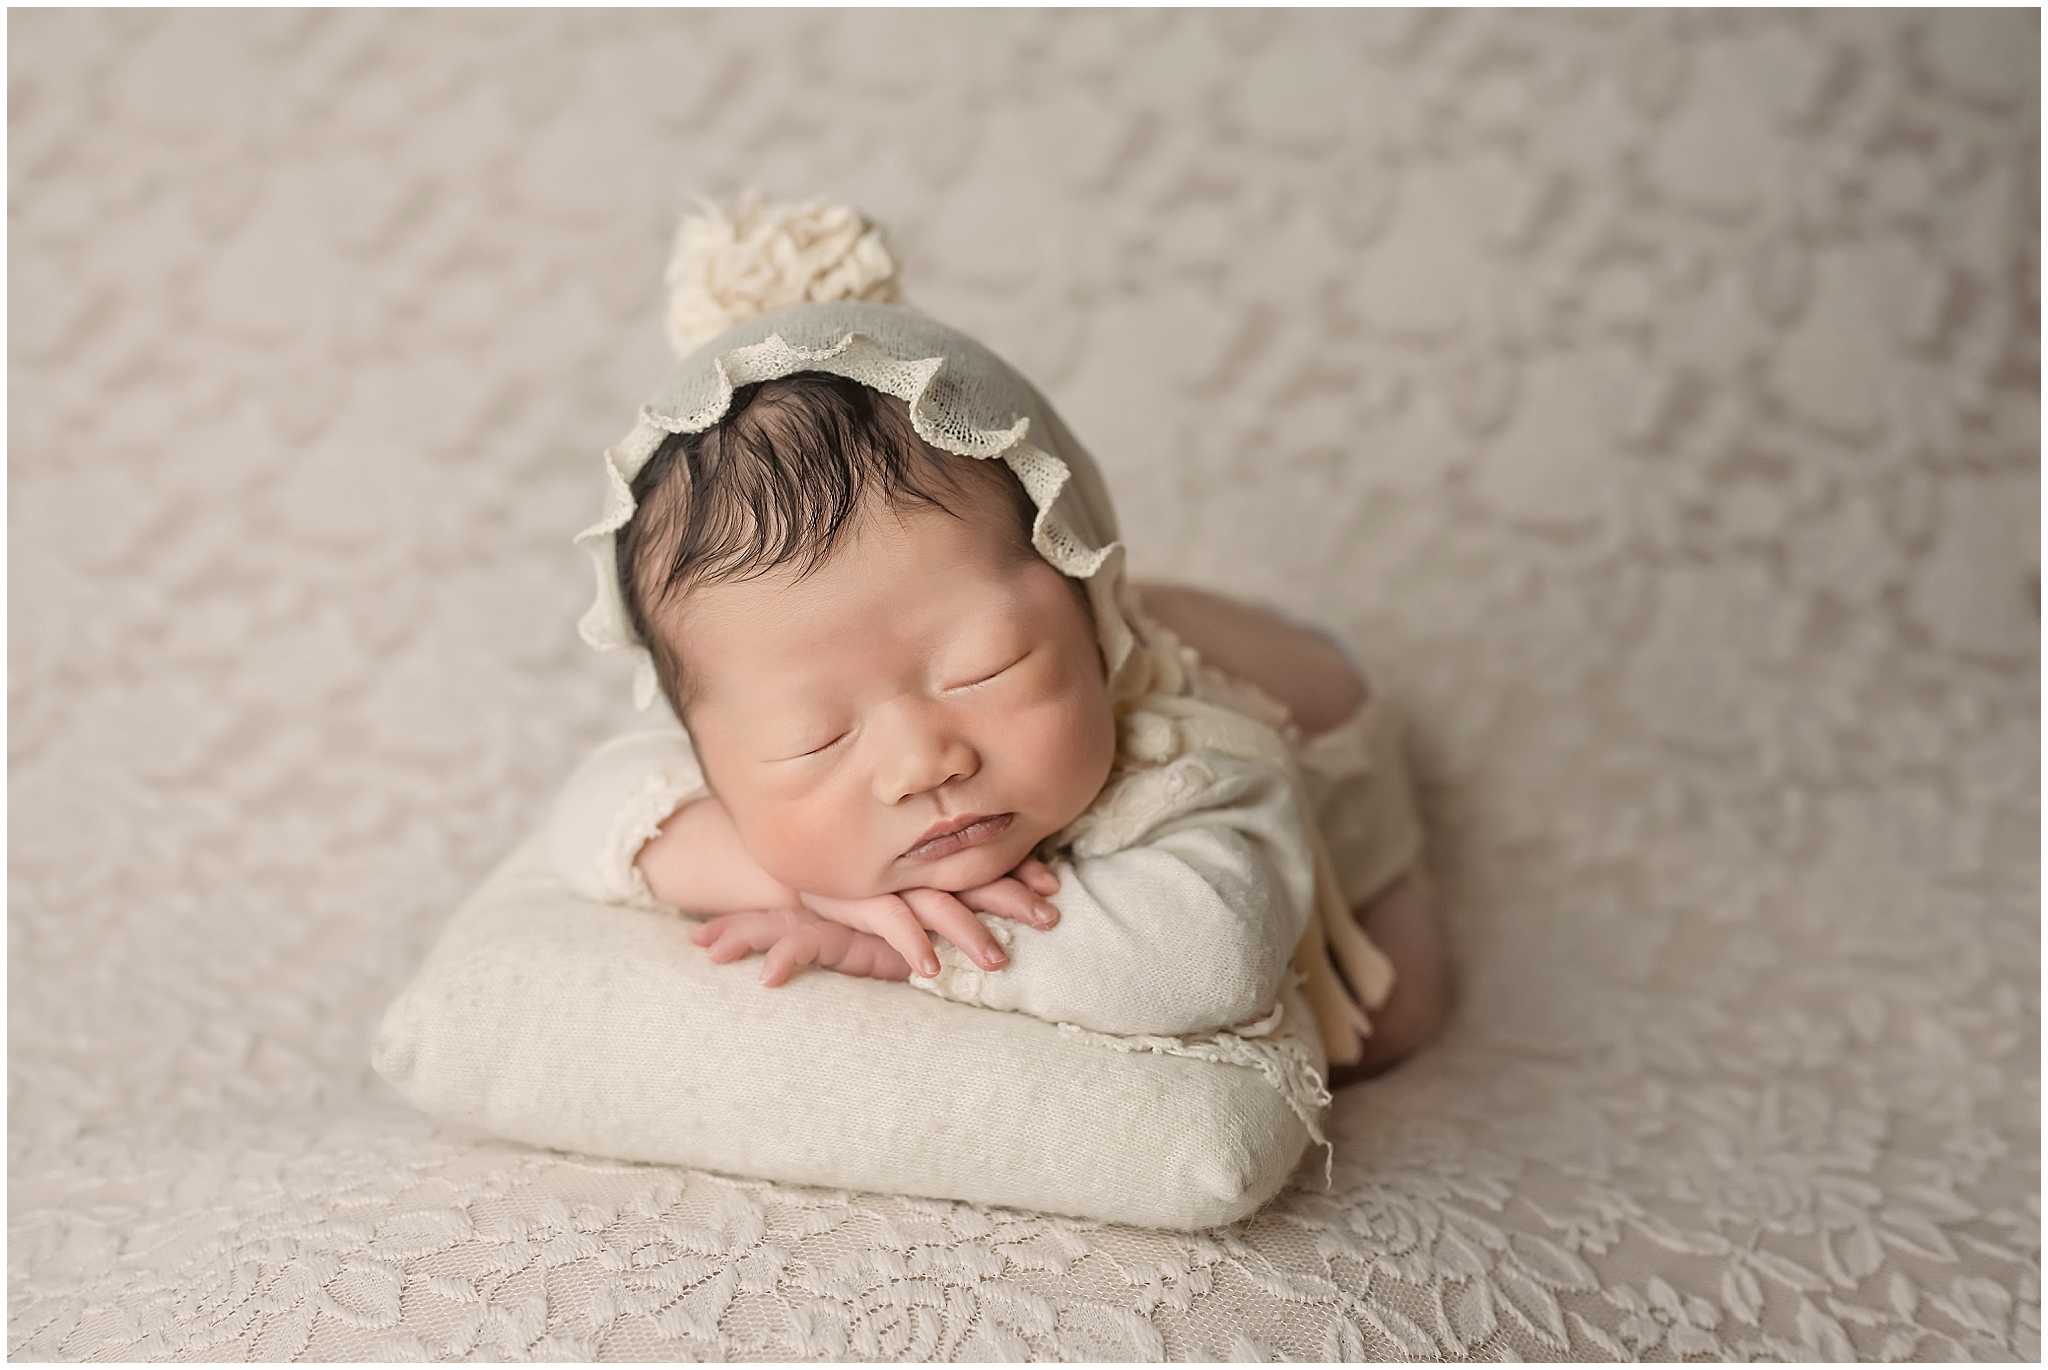 newborn baby resting on pillow during newborn session in London Ontario photography studio